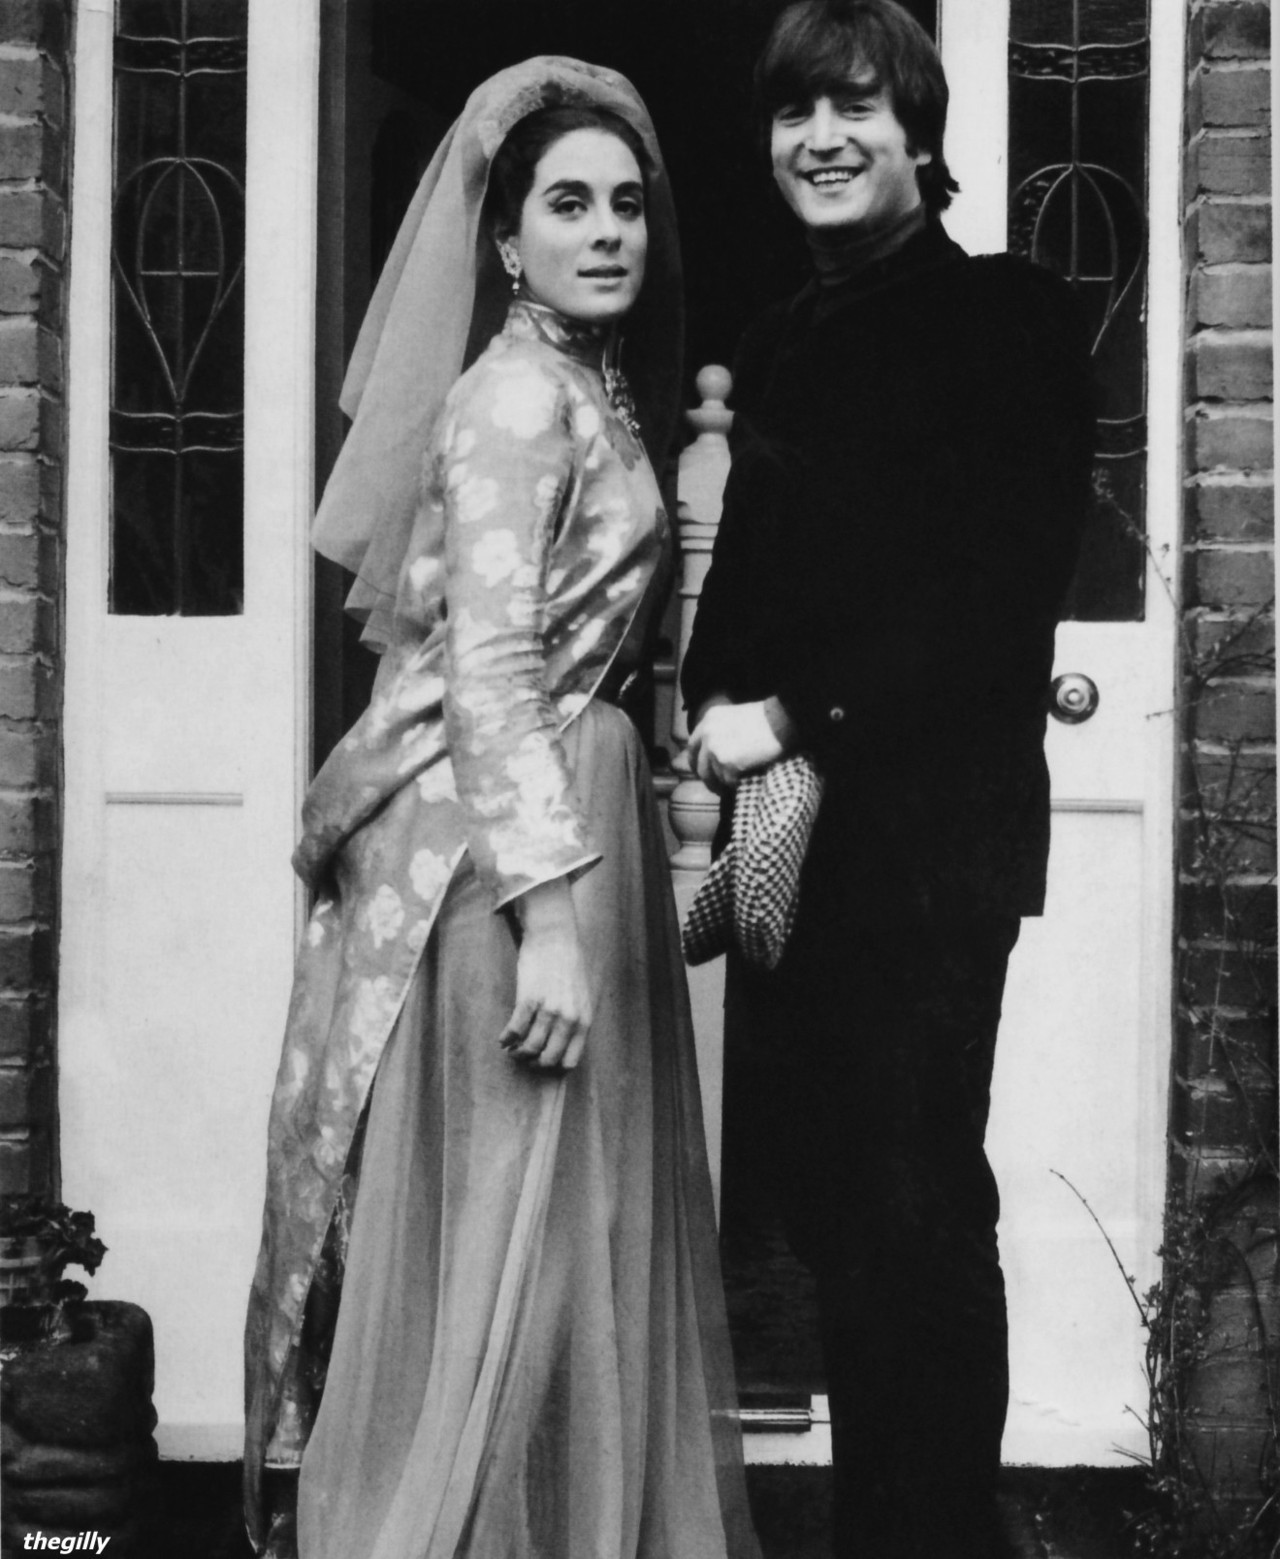 Inactive Blog John Lennon And Eleanor Bron At The Communal